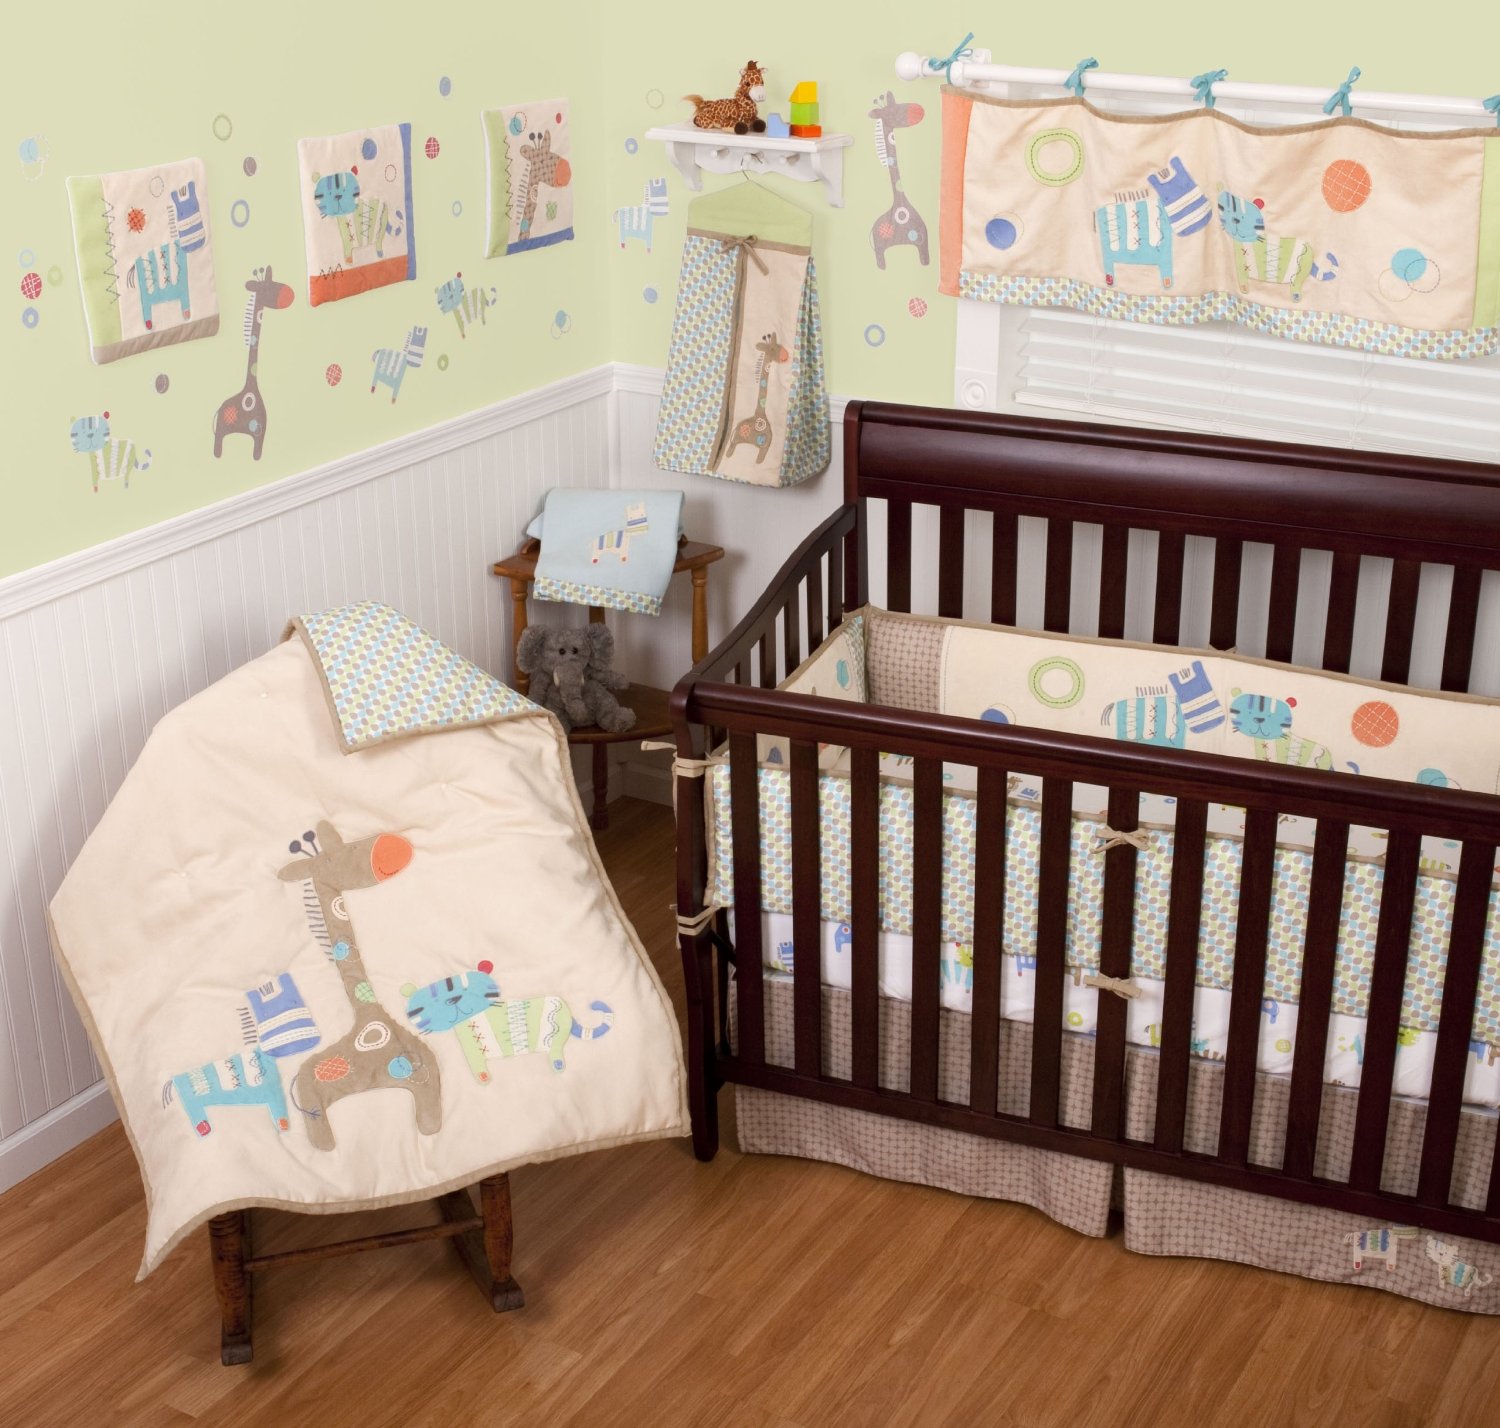 Sumersault Animal Stipes and Spots Baby bedding